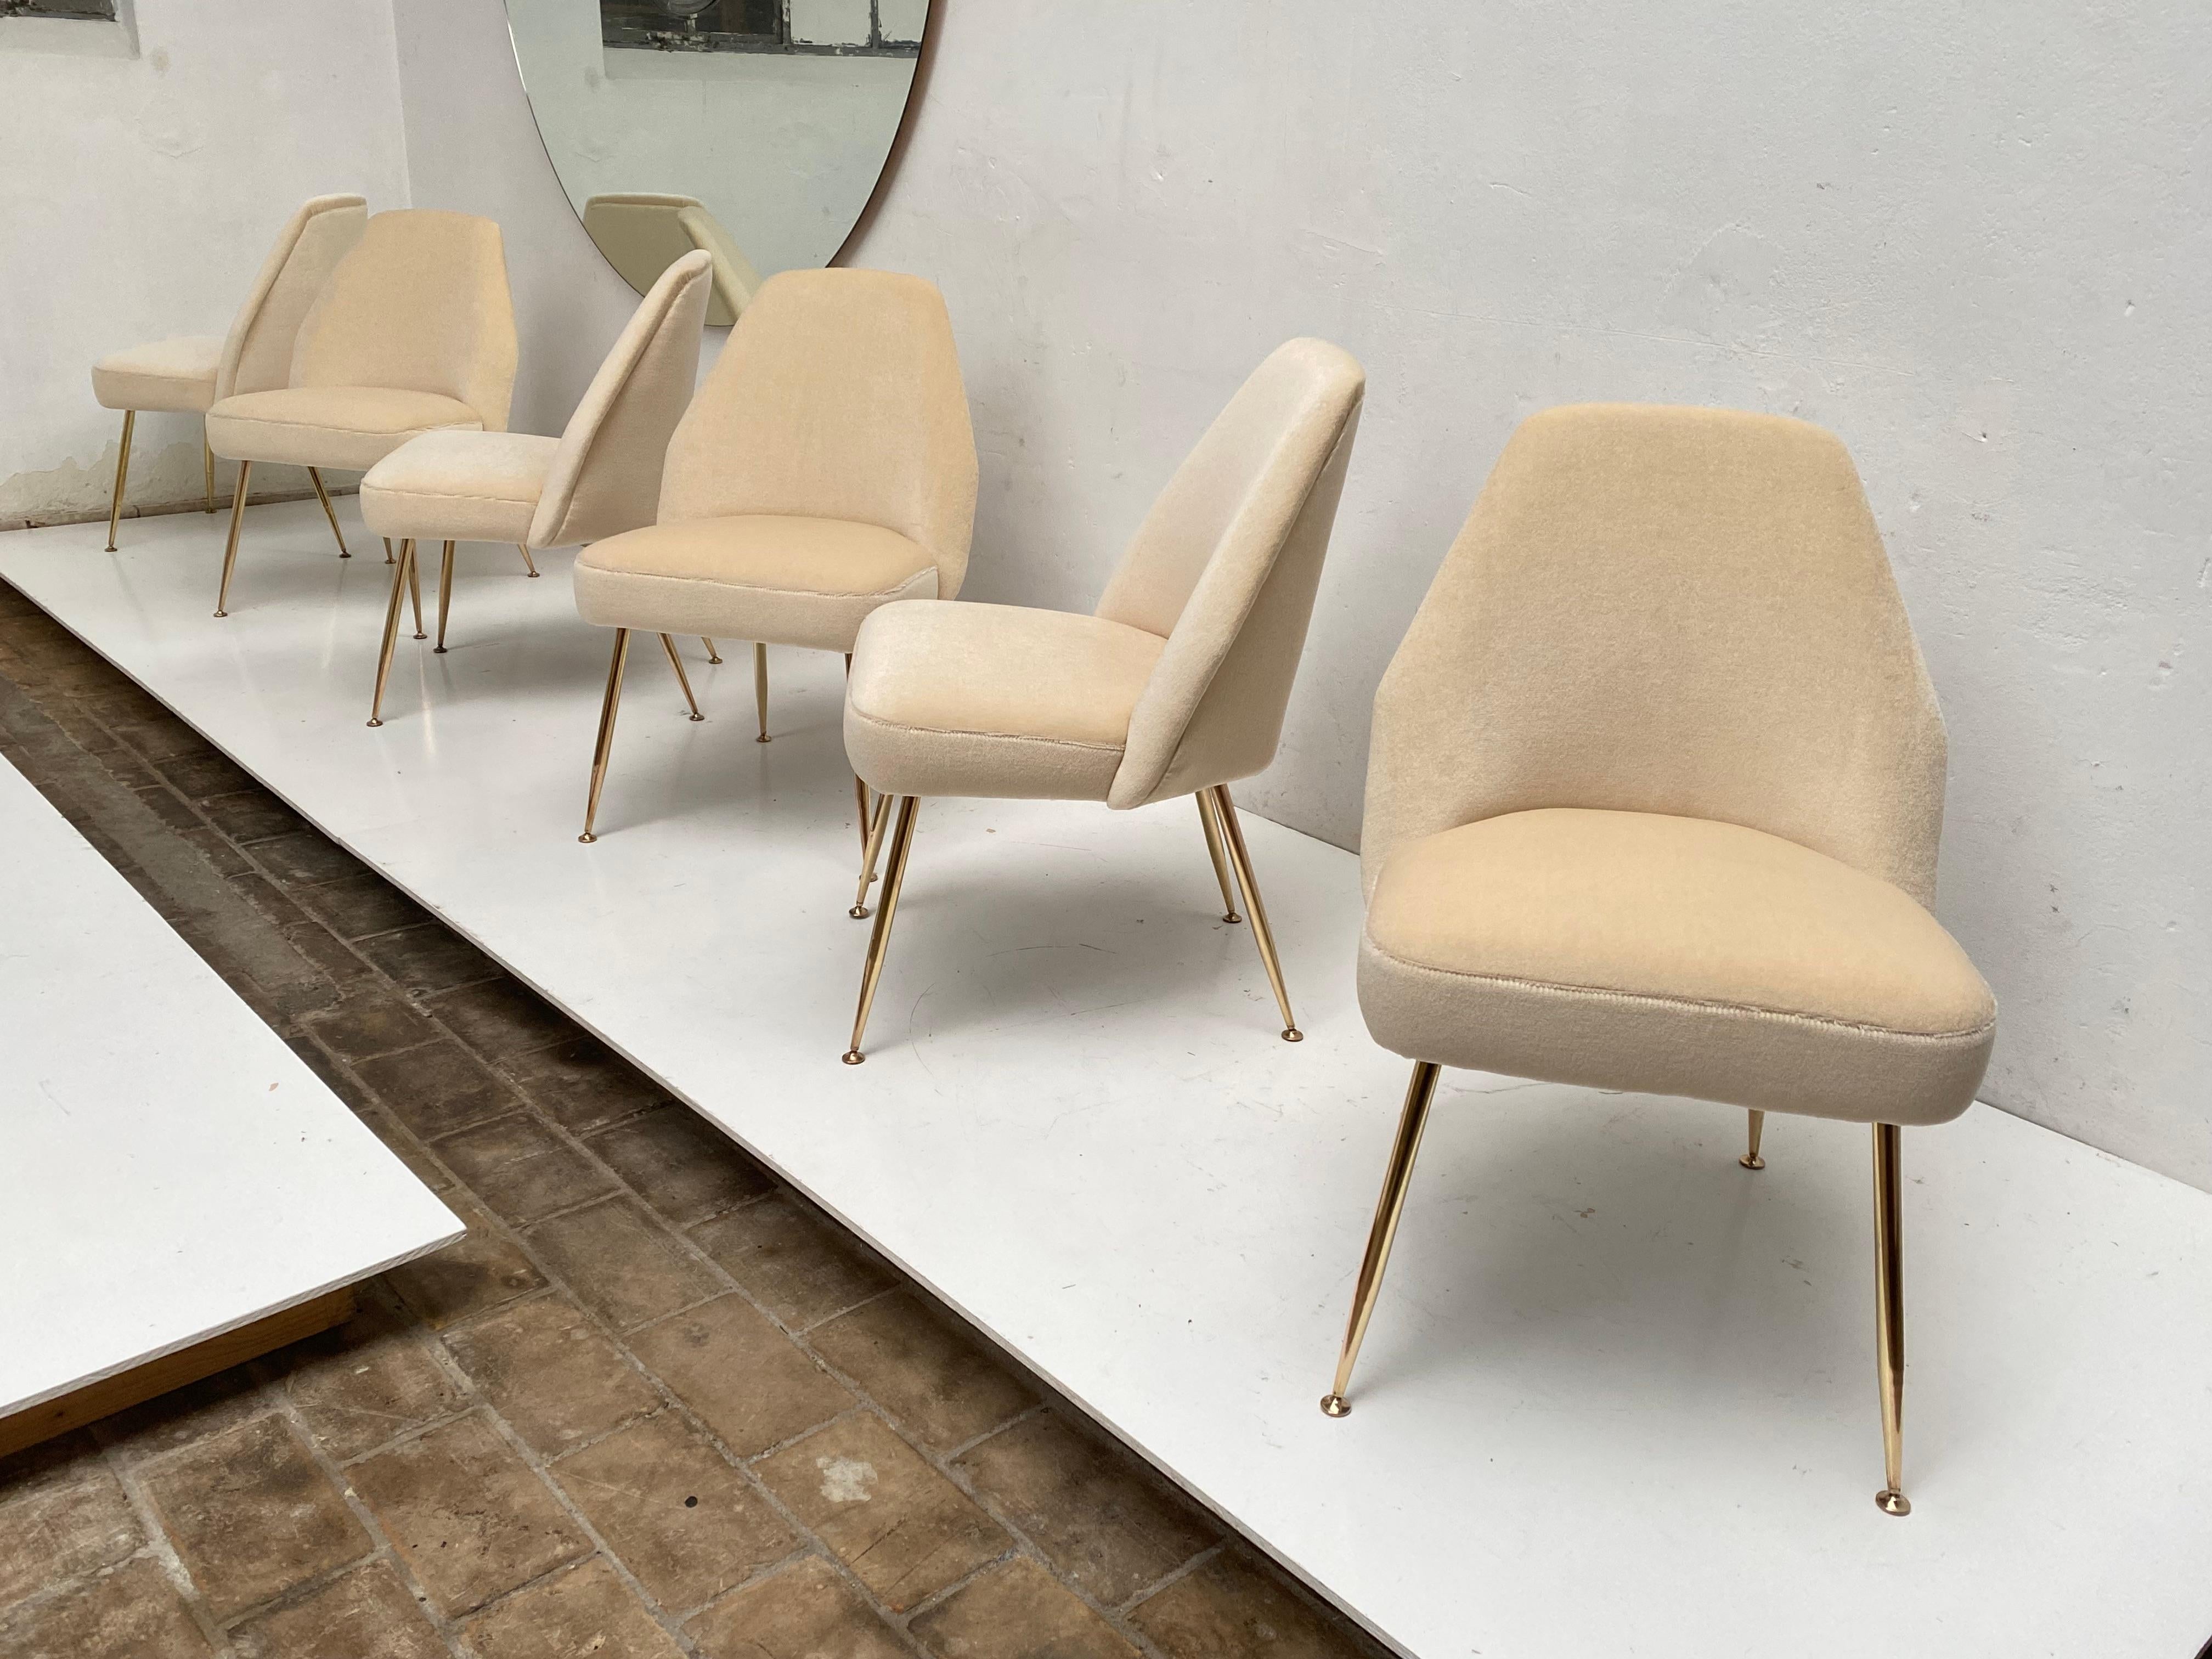 12 Brass & Mohair Campanula Chairs by Pagani (Partner of Gio Ponti) Arflex 1952  In Good Condition For Sale In bergen op zoom, NL